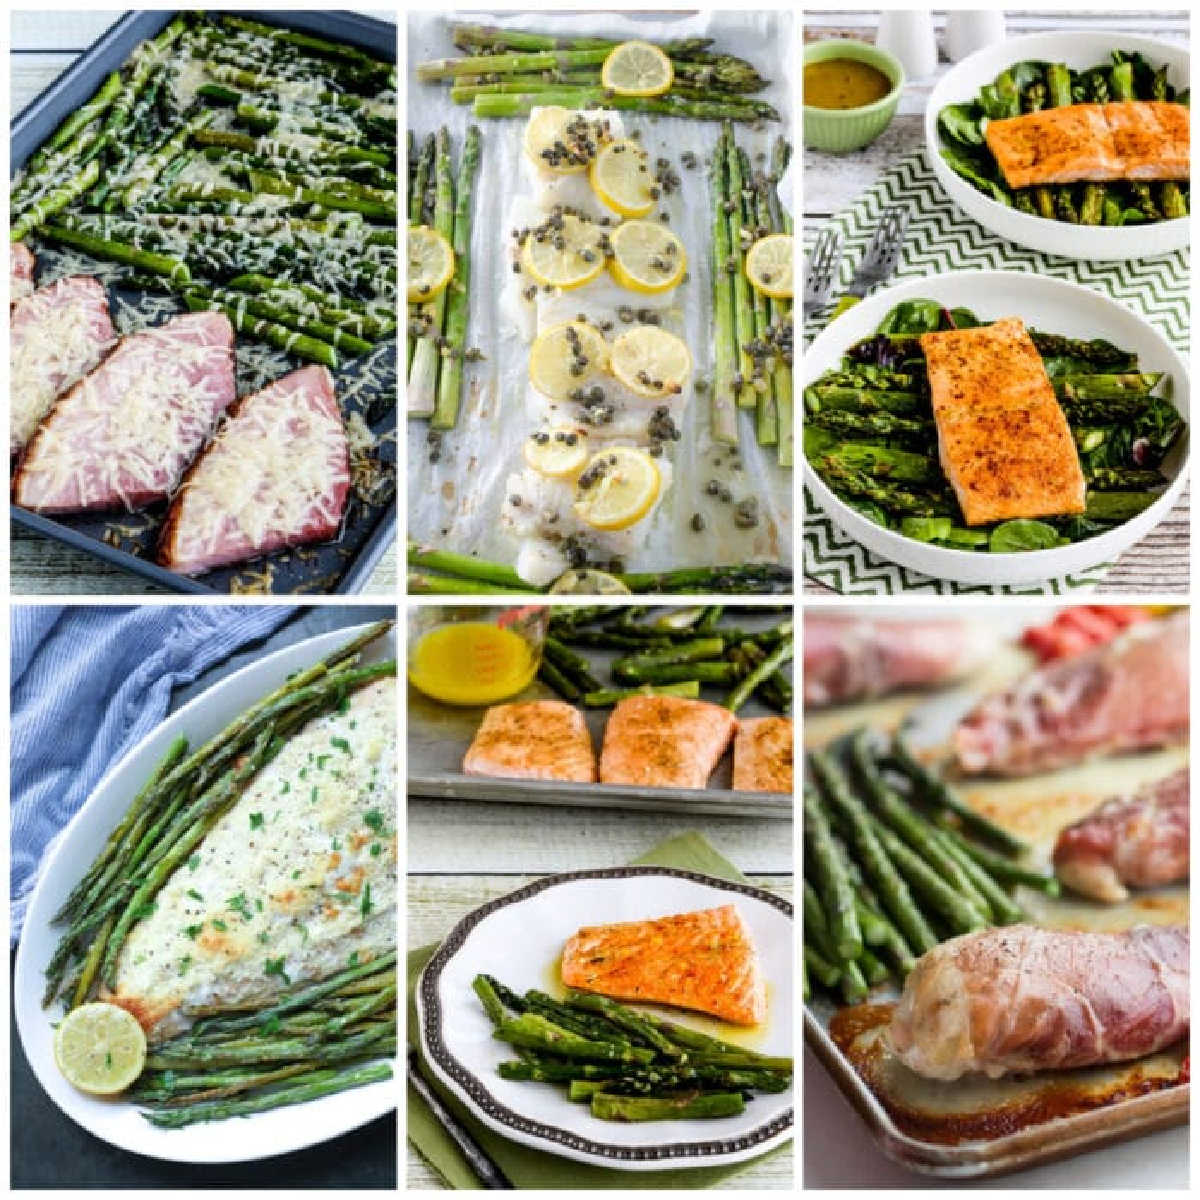 Square image for Sheet Pan Meals with Asparagus showing featured recipes.